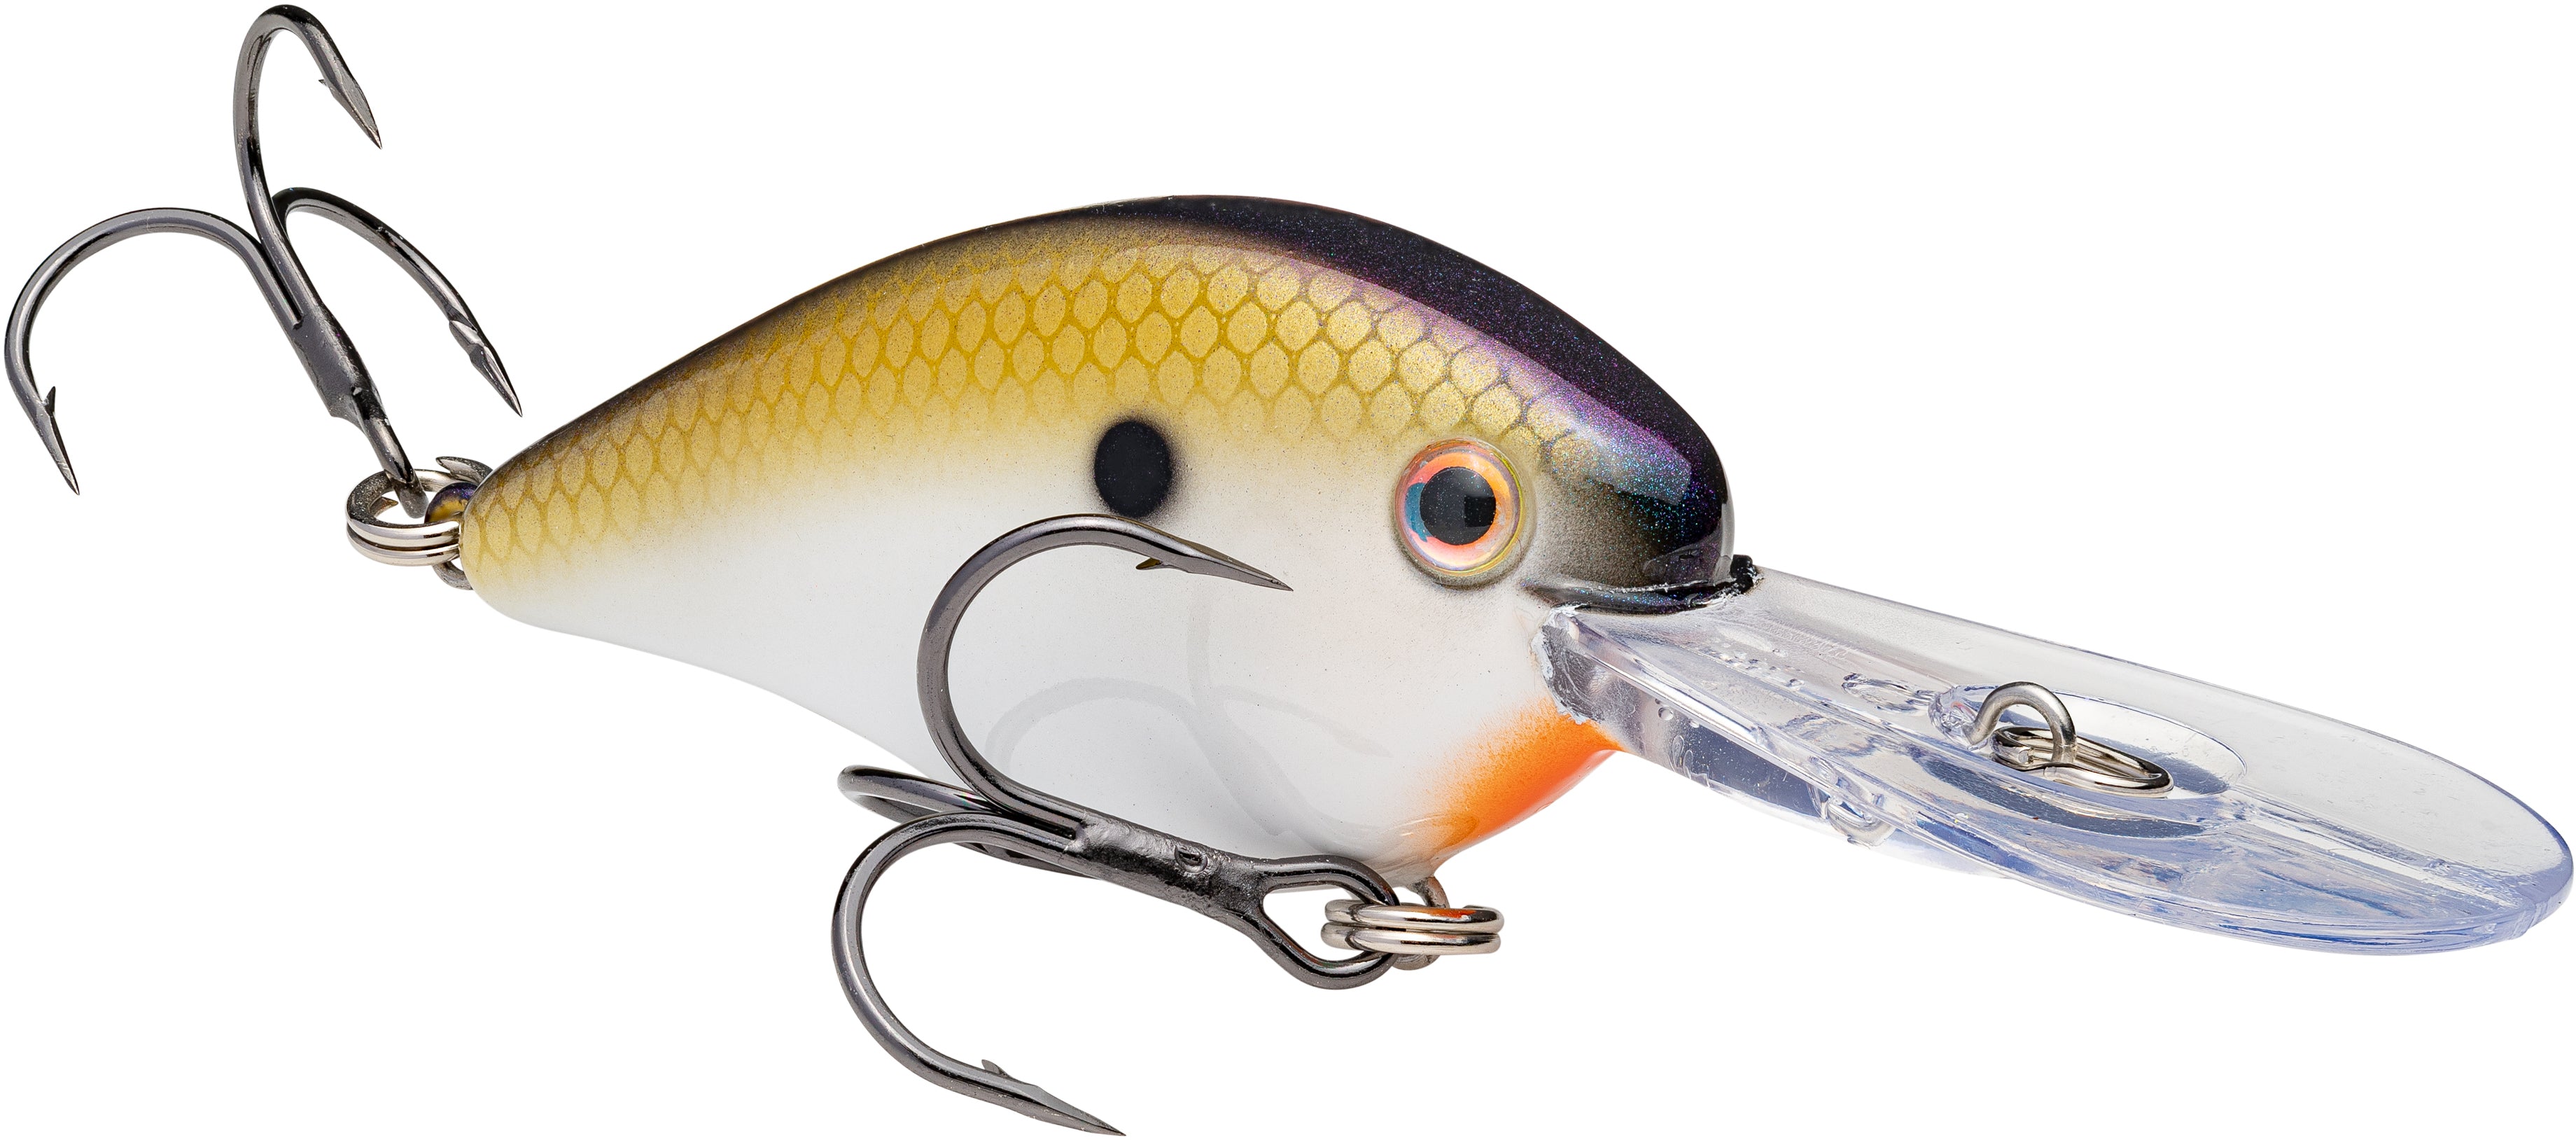 KVD compares the 1.5 to the new Chick Magnet - Crankbait Bass